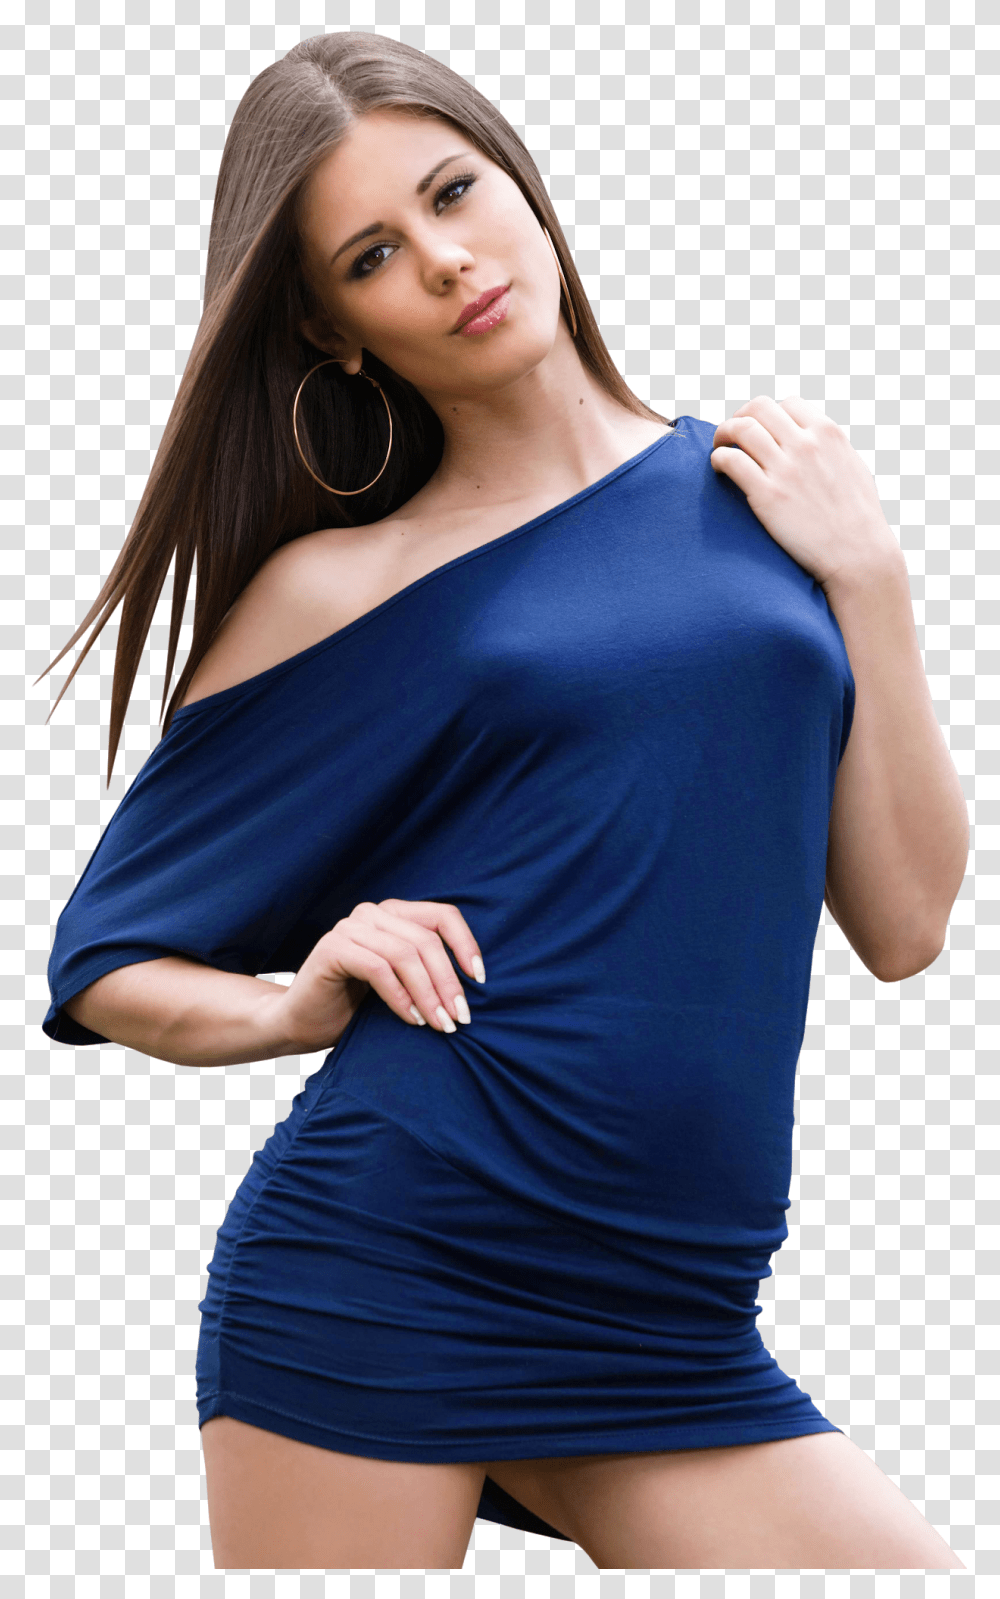 Sexy Little Caprice In Blue Dress Image Photo Shoot, Apparel, Evening Dress, Robe Transparent Png